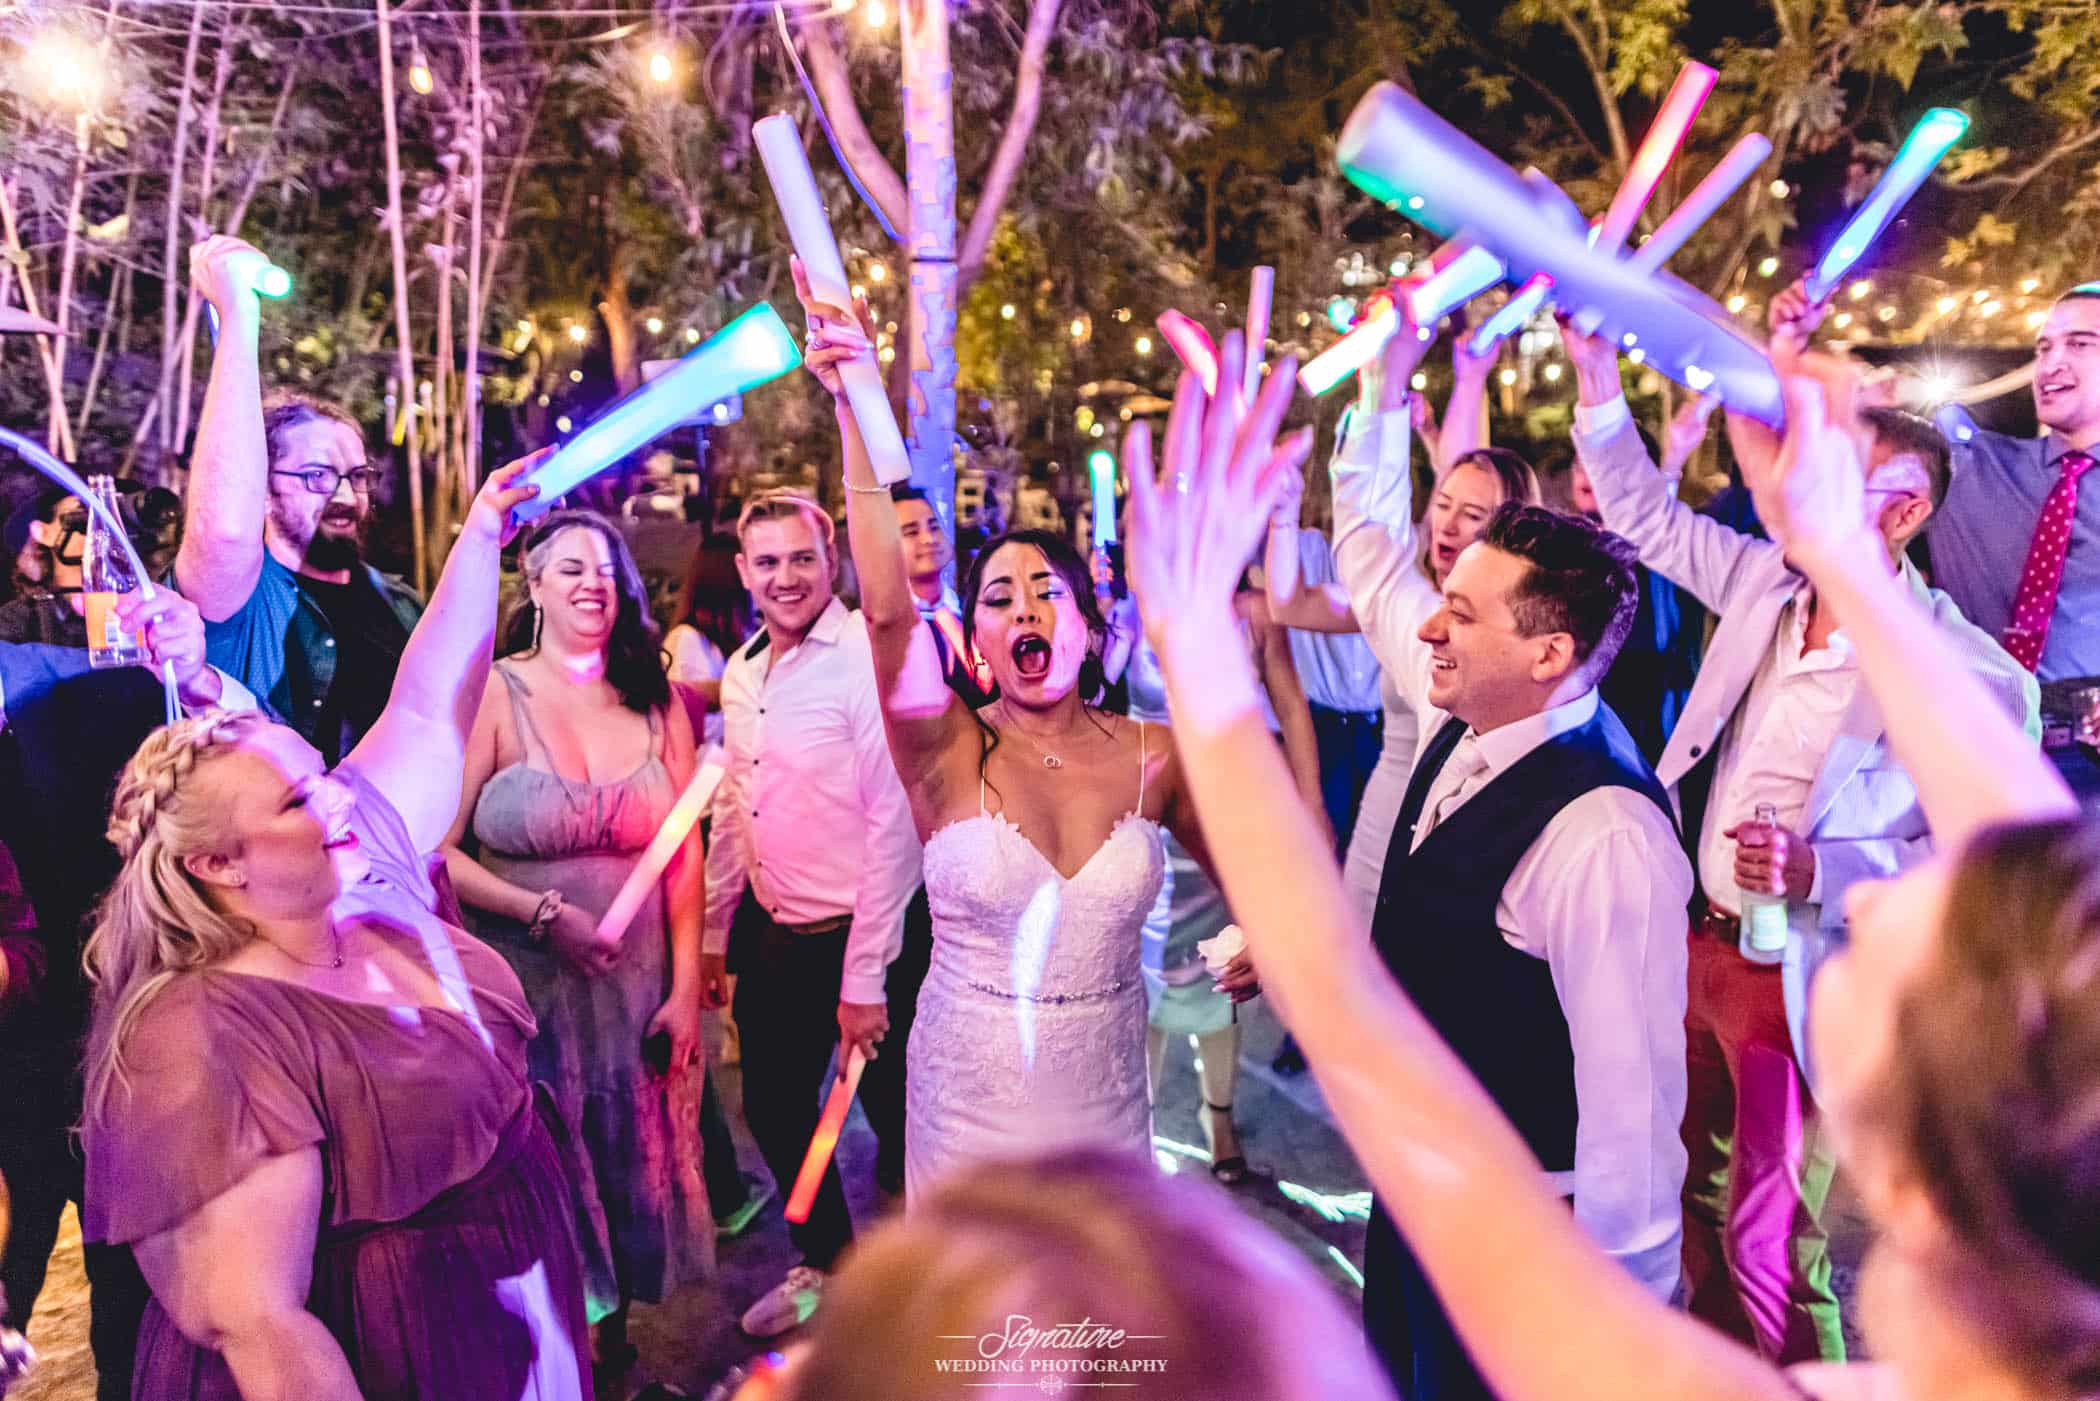 Bride and groom with guests holding light sticks